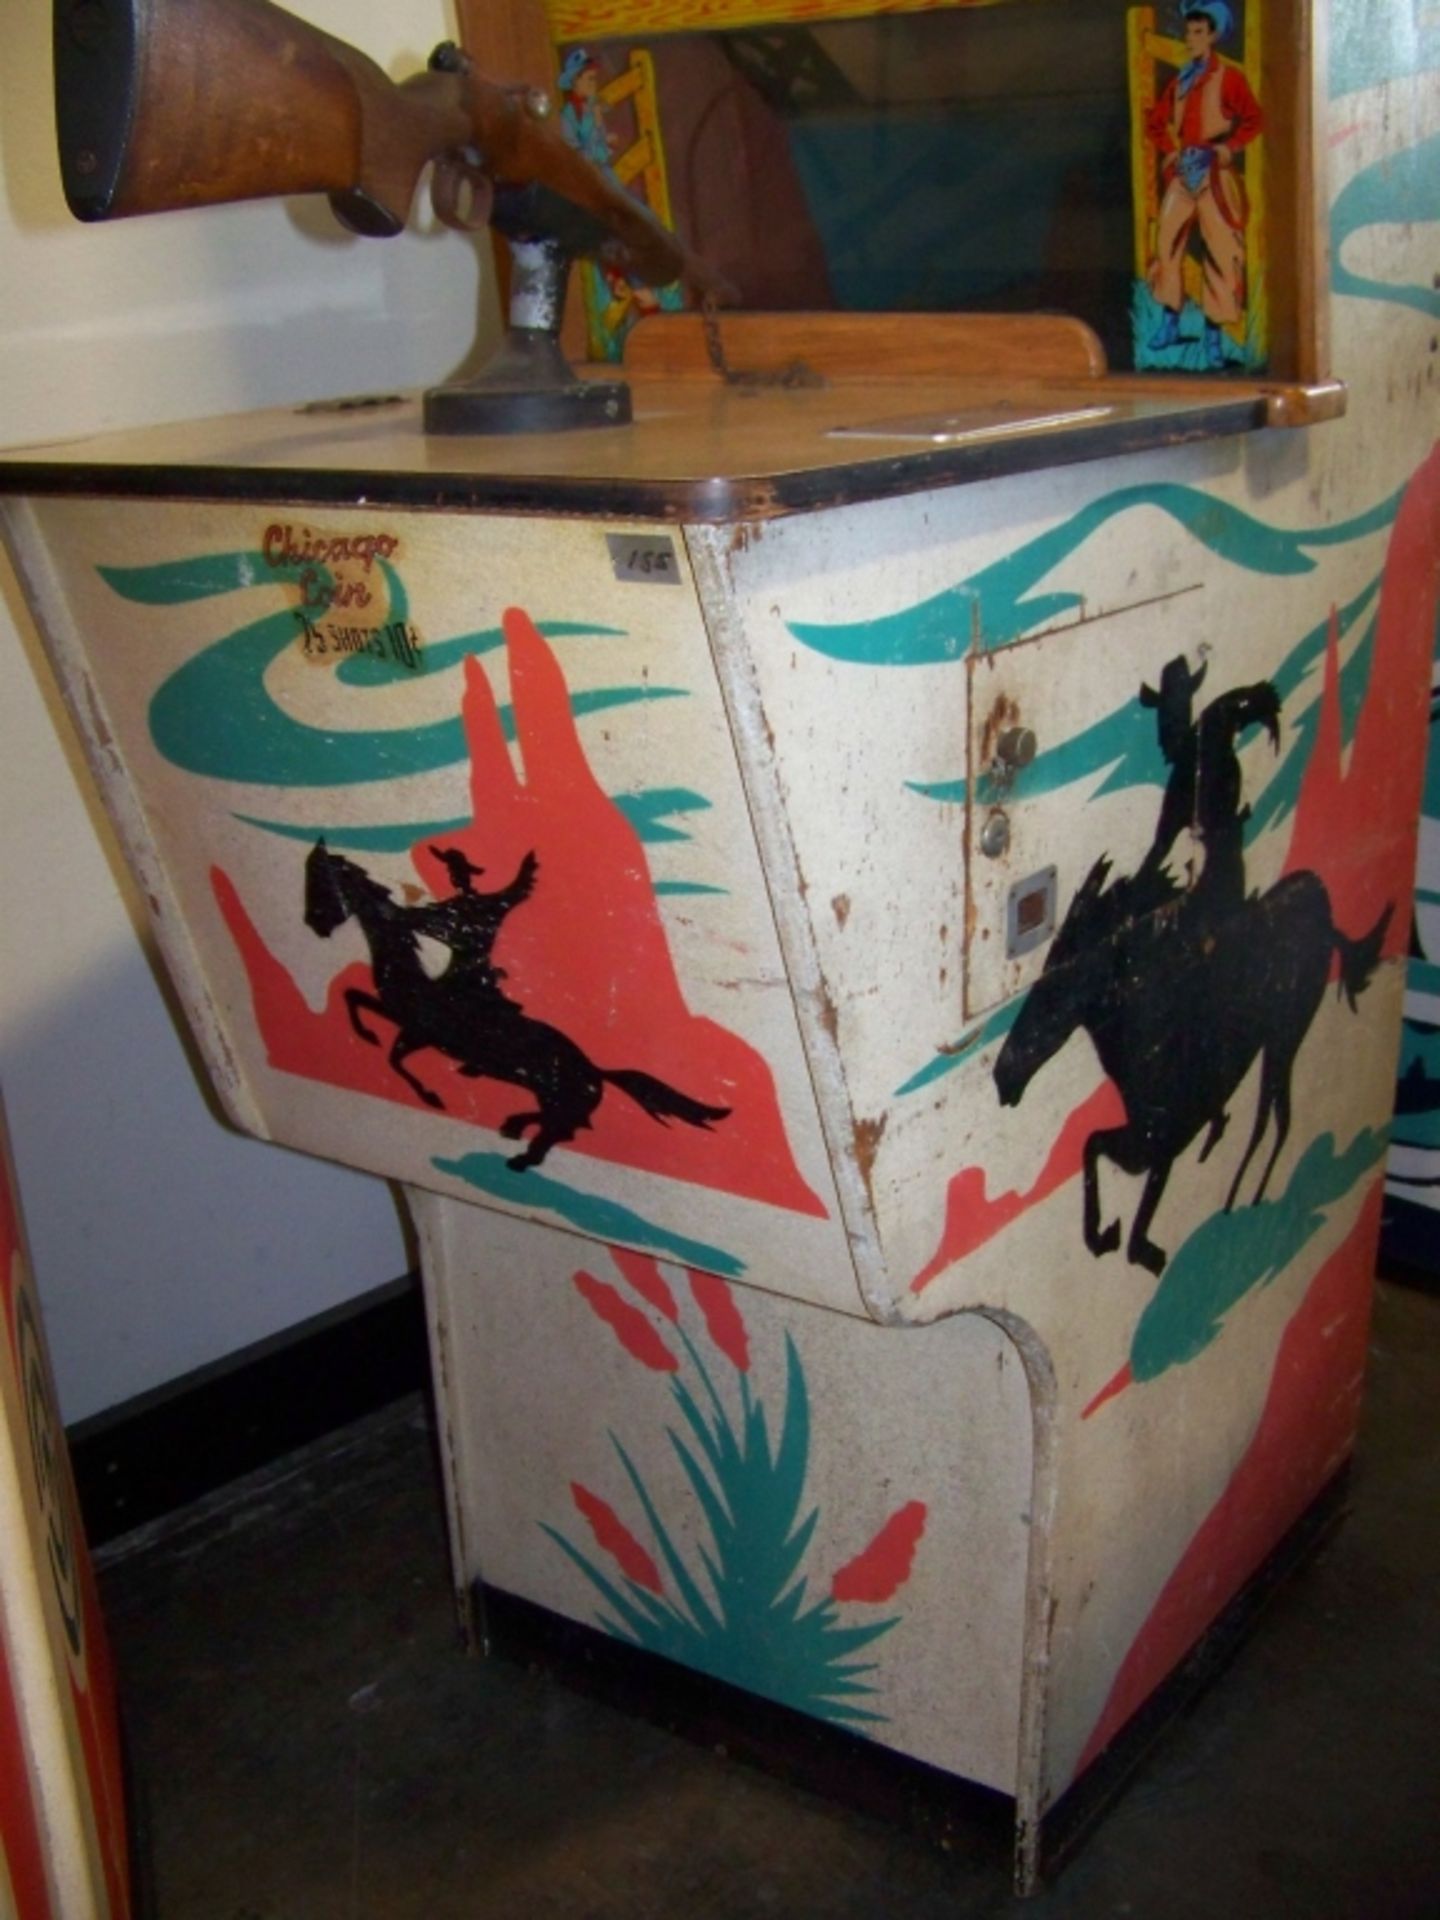 1960 CHICAGO COIN'S PONY EXPRESS RIFLE ARCADE GAME - Image 3 of 6